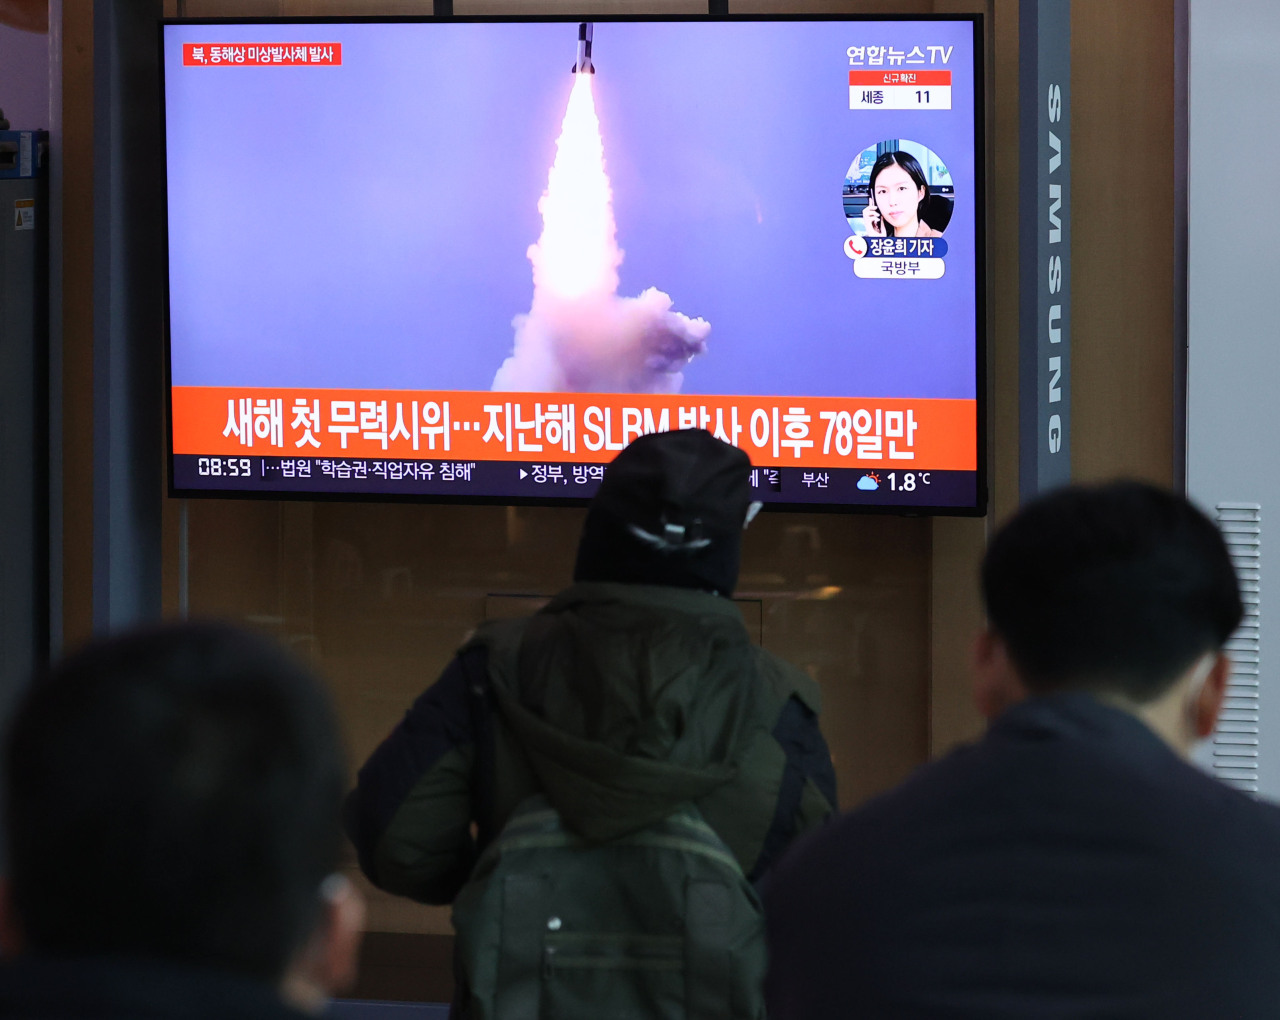 North Korea on Wednesday fires what appears to be a ballistic missile toward the East Sea. (Yonhap)